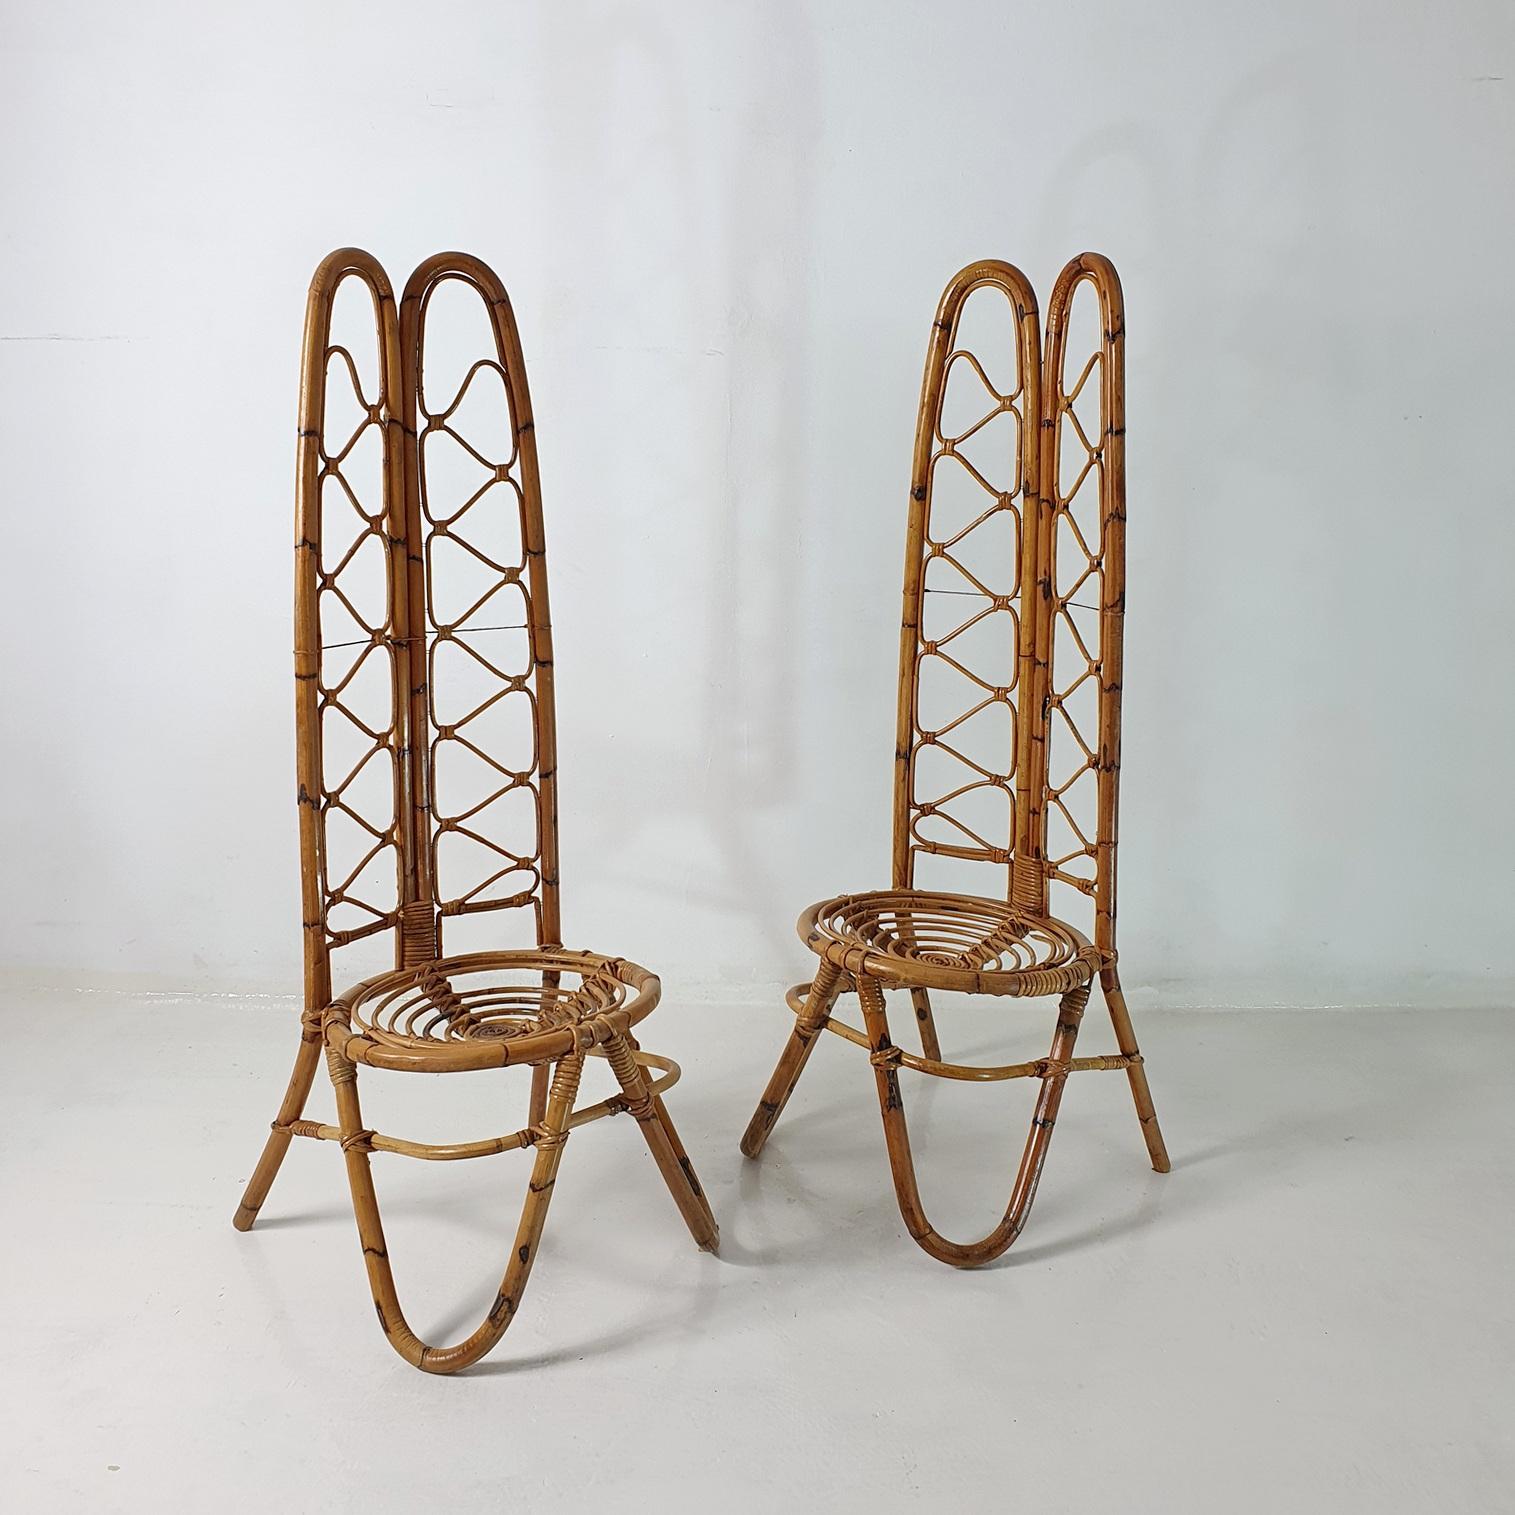 Midcentury pair of highbacked chairs in bamboo and rattan in the manner of manufacturer Bonacina from the 1950's. In good stable condition.